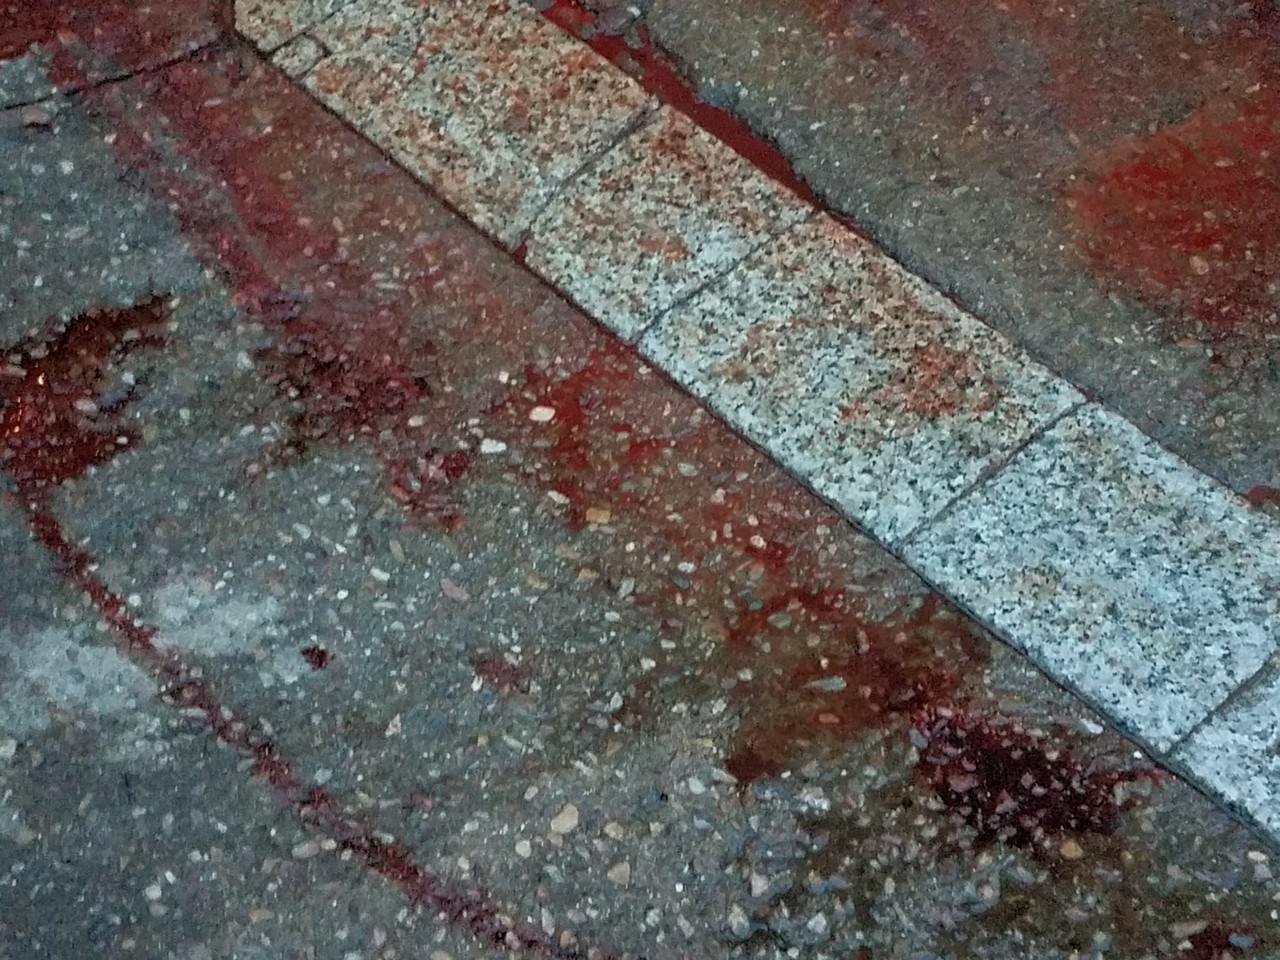 a red blood on the ground